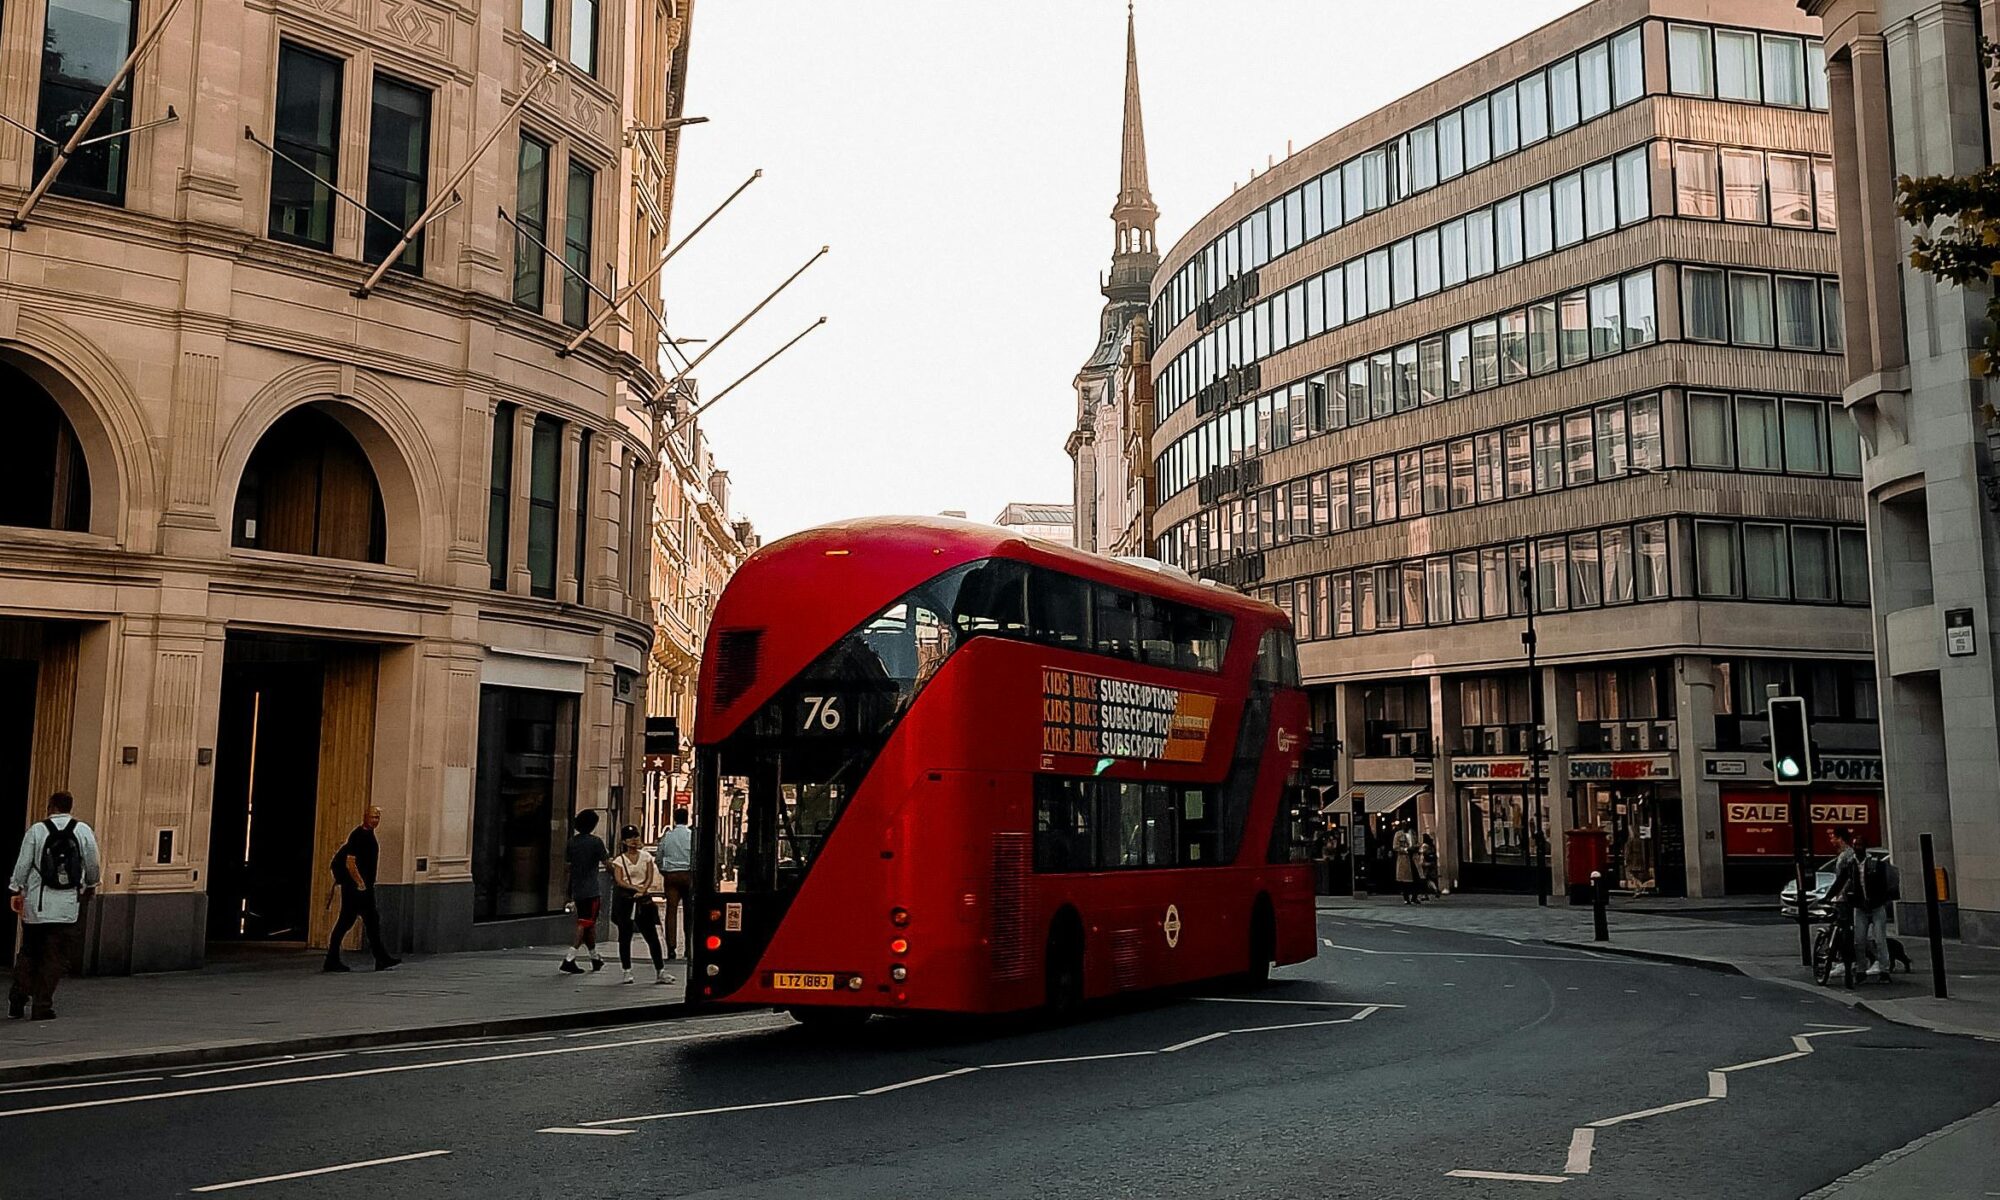 image of a red bus in London